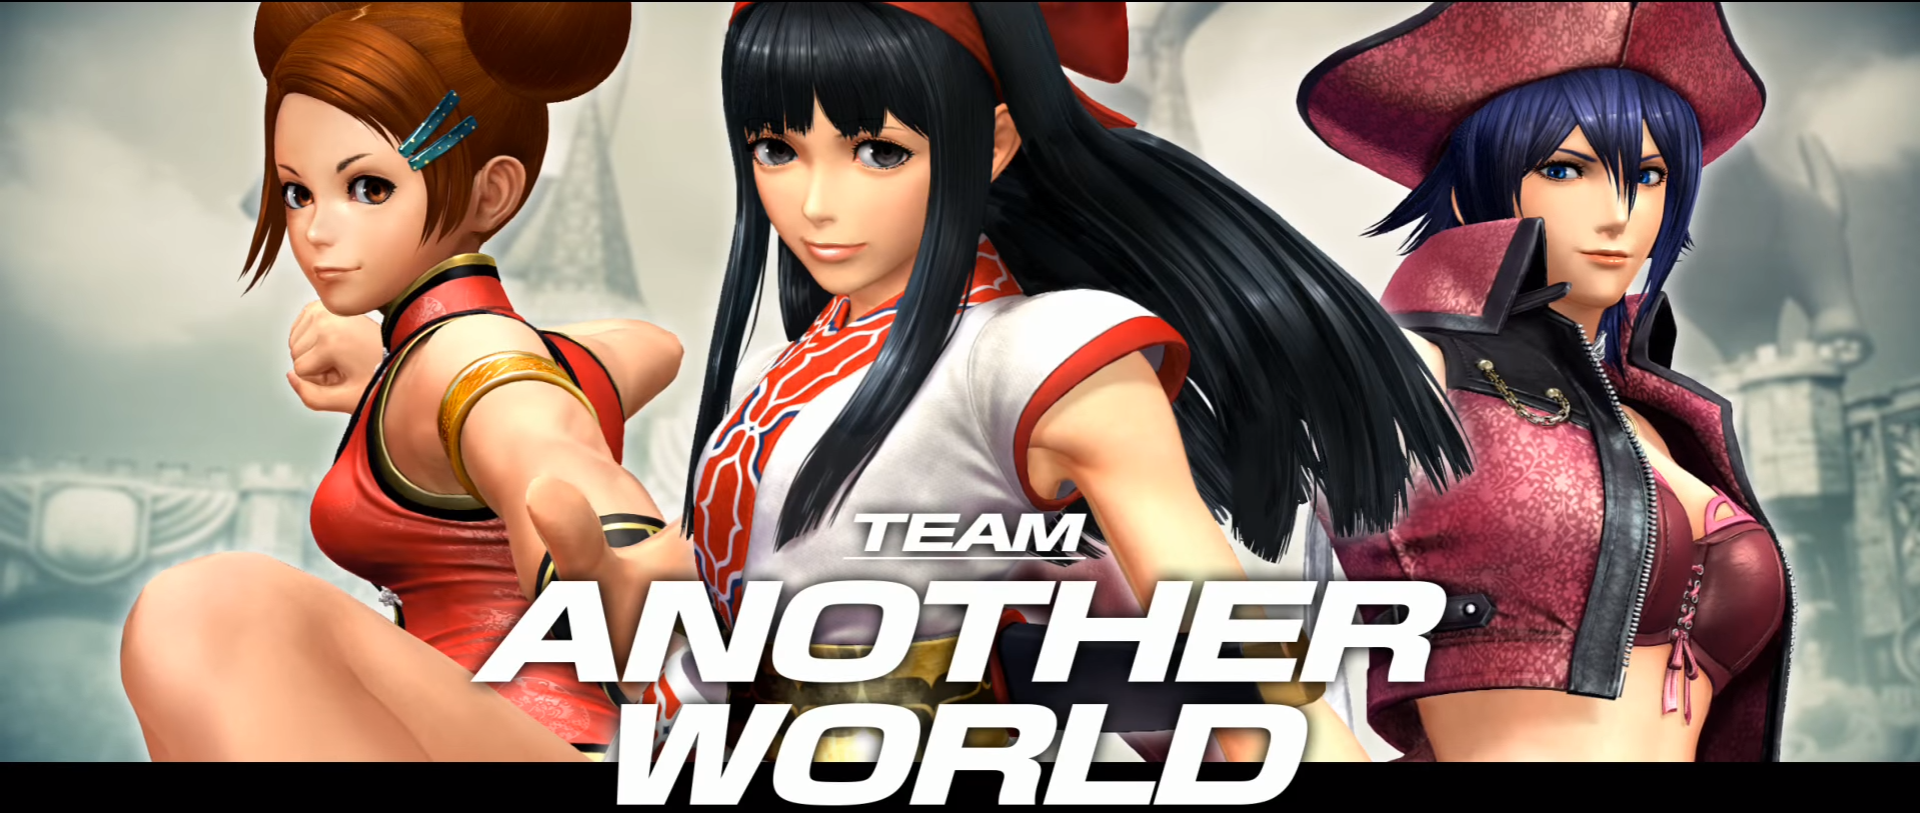 SNK presenta al equipo “Another World” en The King of Fighters XIV